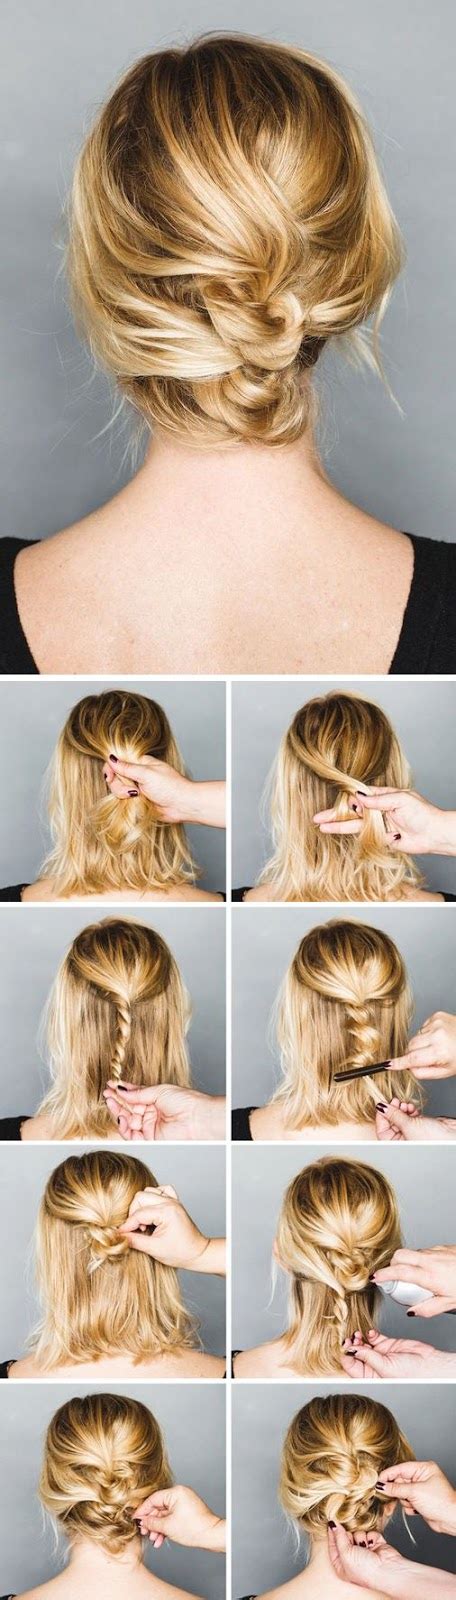 4 Messy Updos For Long Hair Trends4everyone